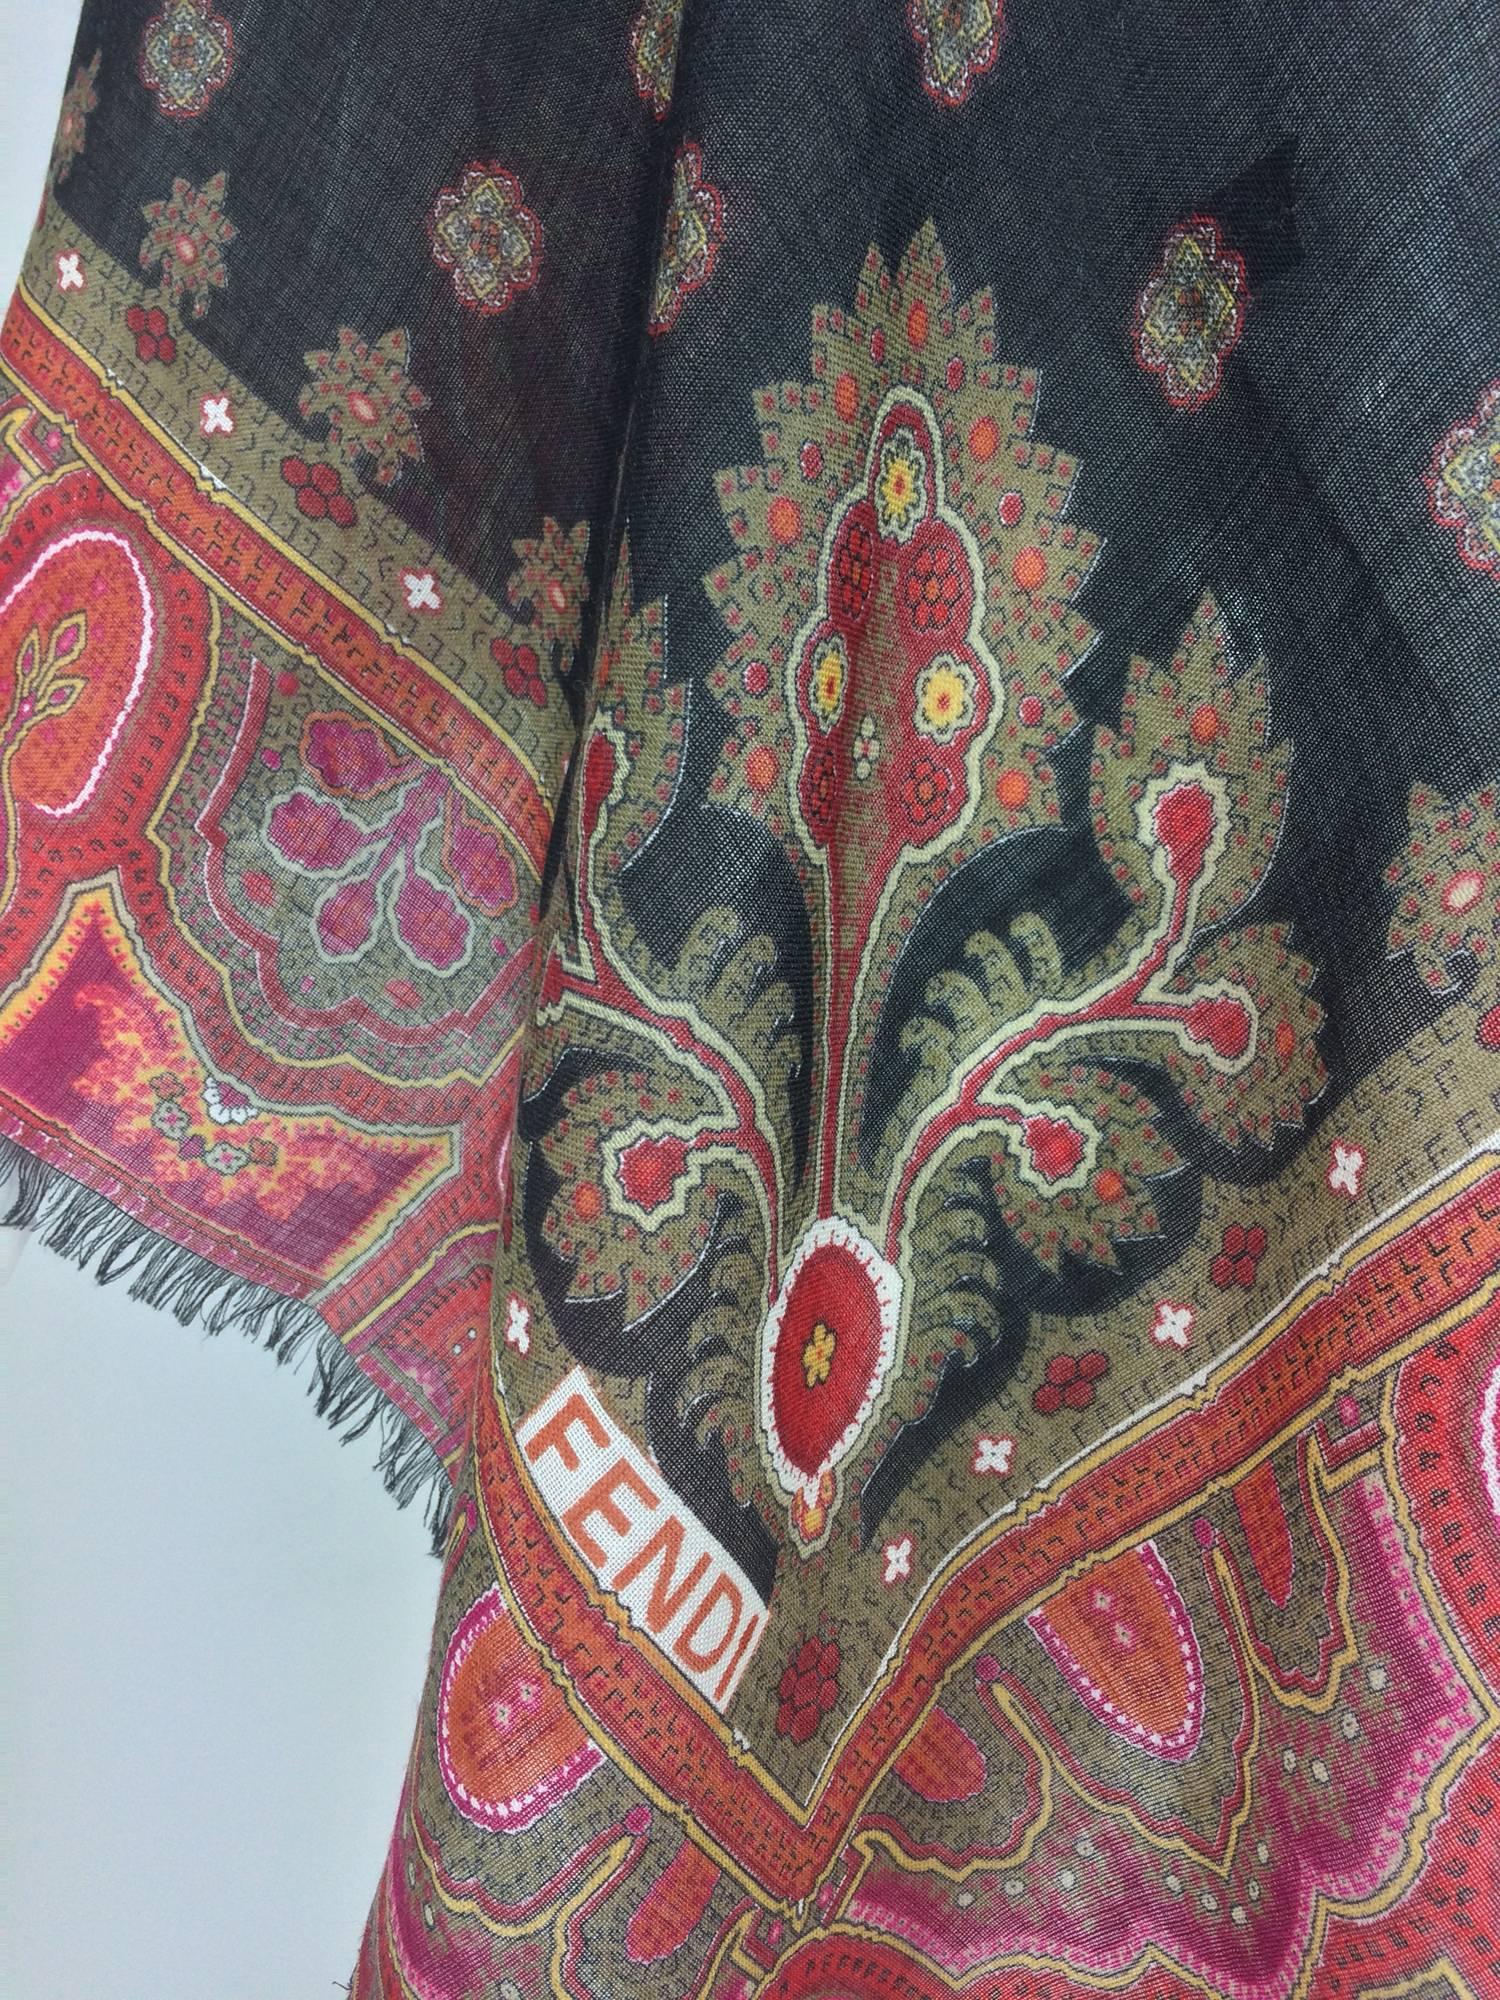 Vintage Fendi large 100% fine wool mix print shawl scarf 1990s...Beautiful soft colours, narrow self fringes on all four sides...In excellent condition...

Sale items are final!

Measurements are:
54" x 54"